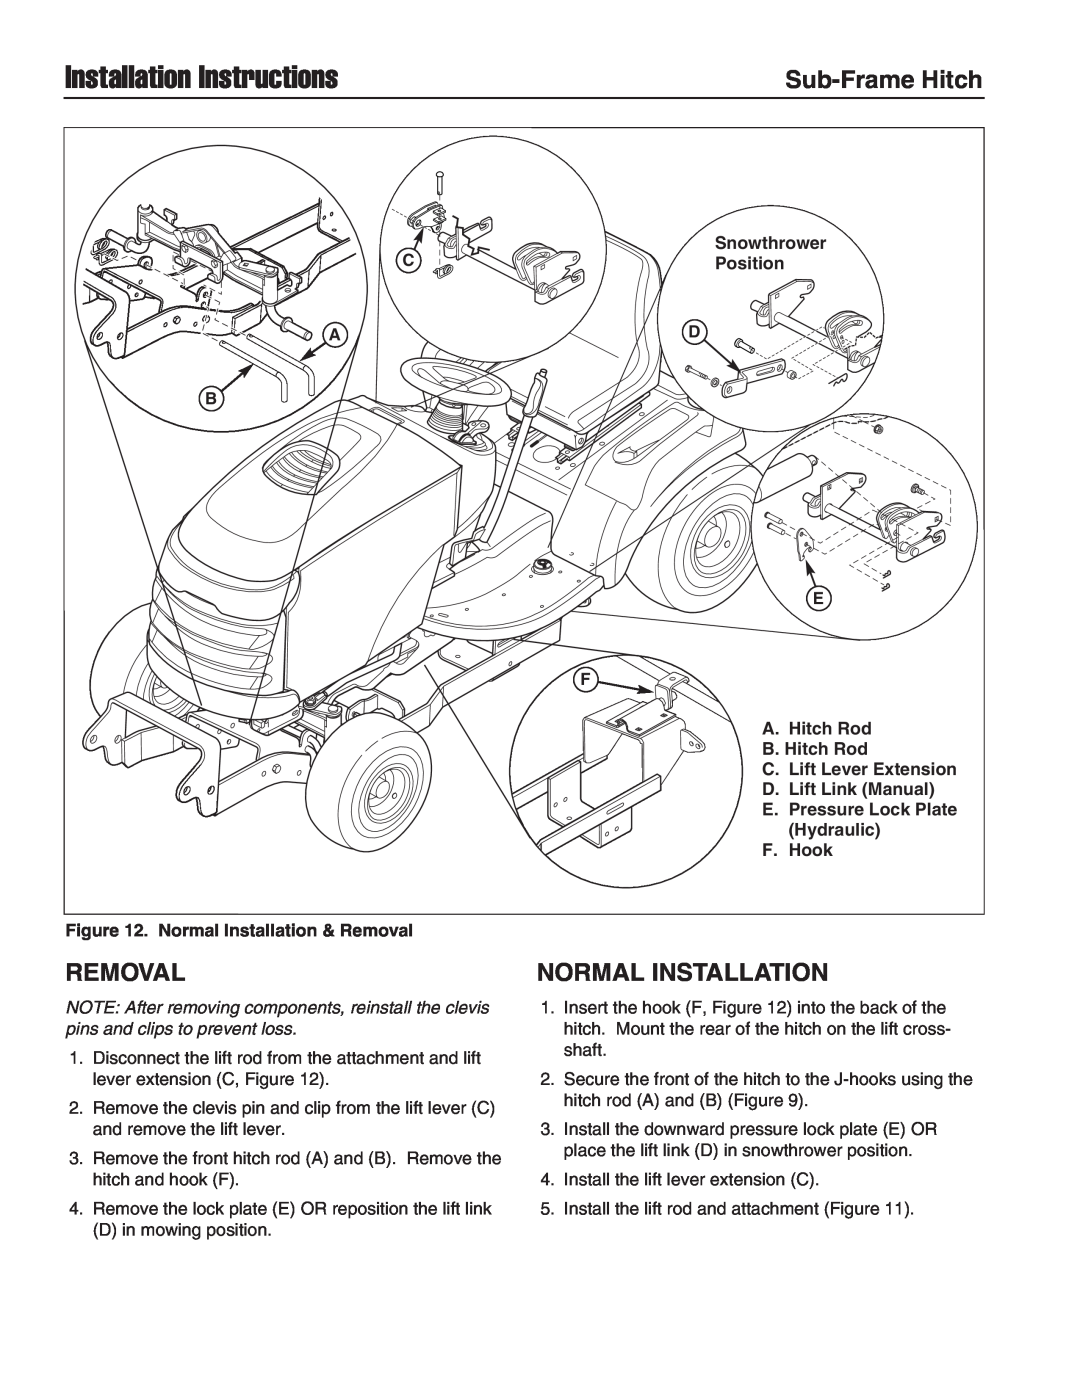 Briggs & Stratton 1695195 Removal, Normal Installation, Installation Instructions, Sub-Frame Hitch 